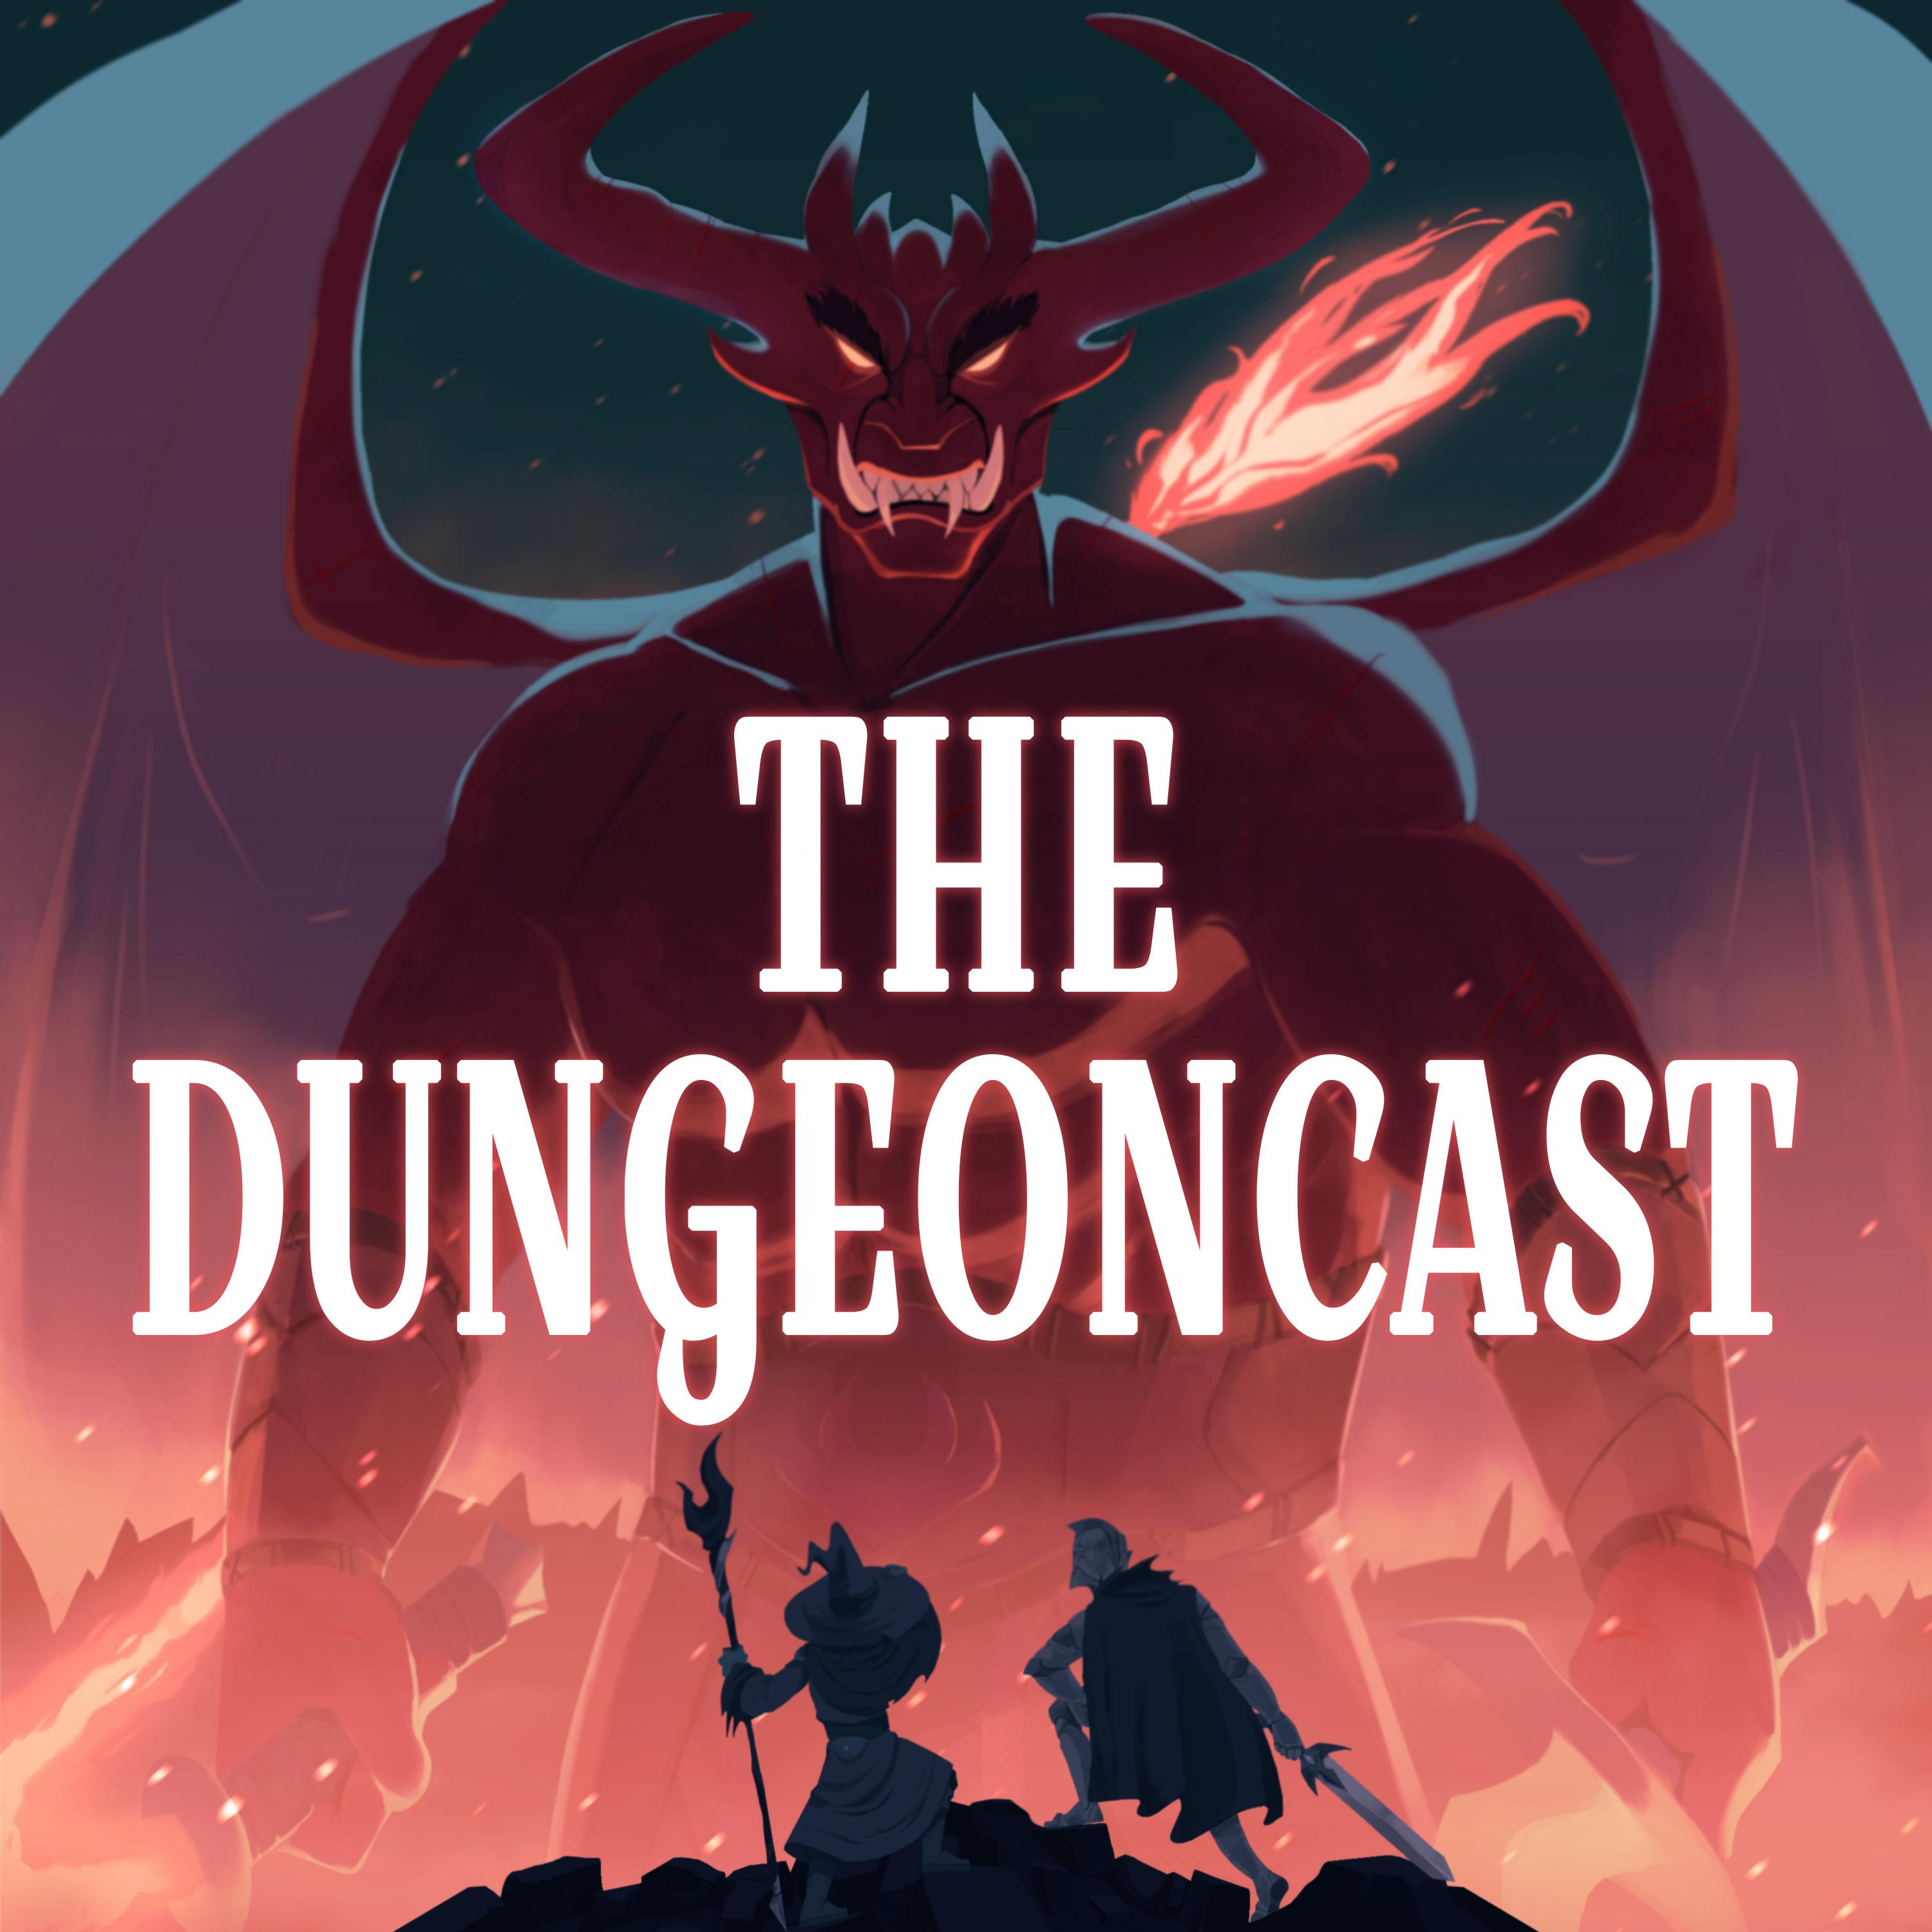 The Dungeoncast